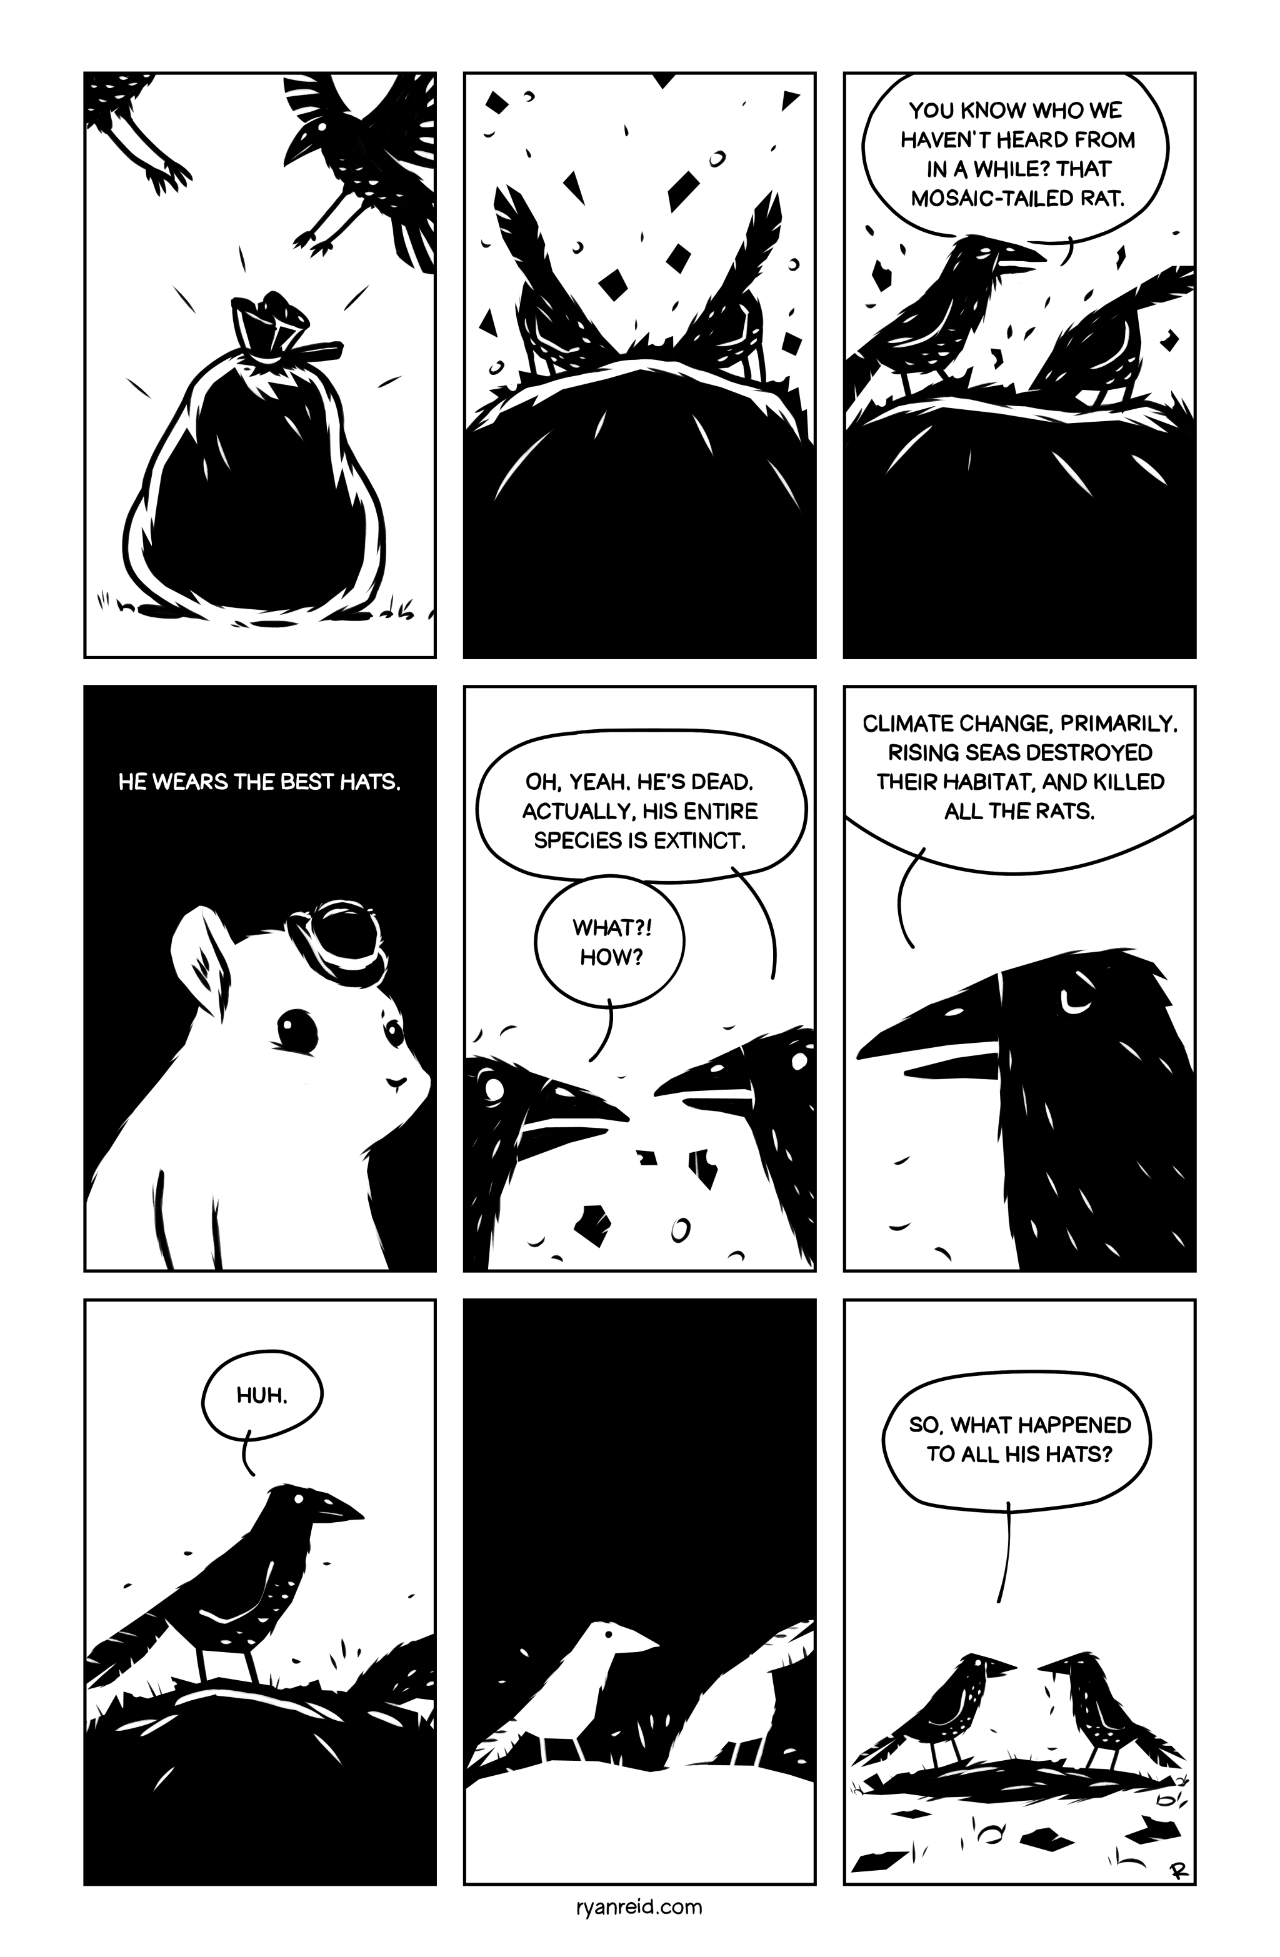 In this comic, the crows remember their good, and stylish, friend, the Mosaic-Tailed Rat. 